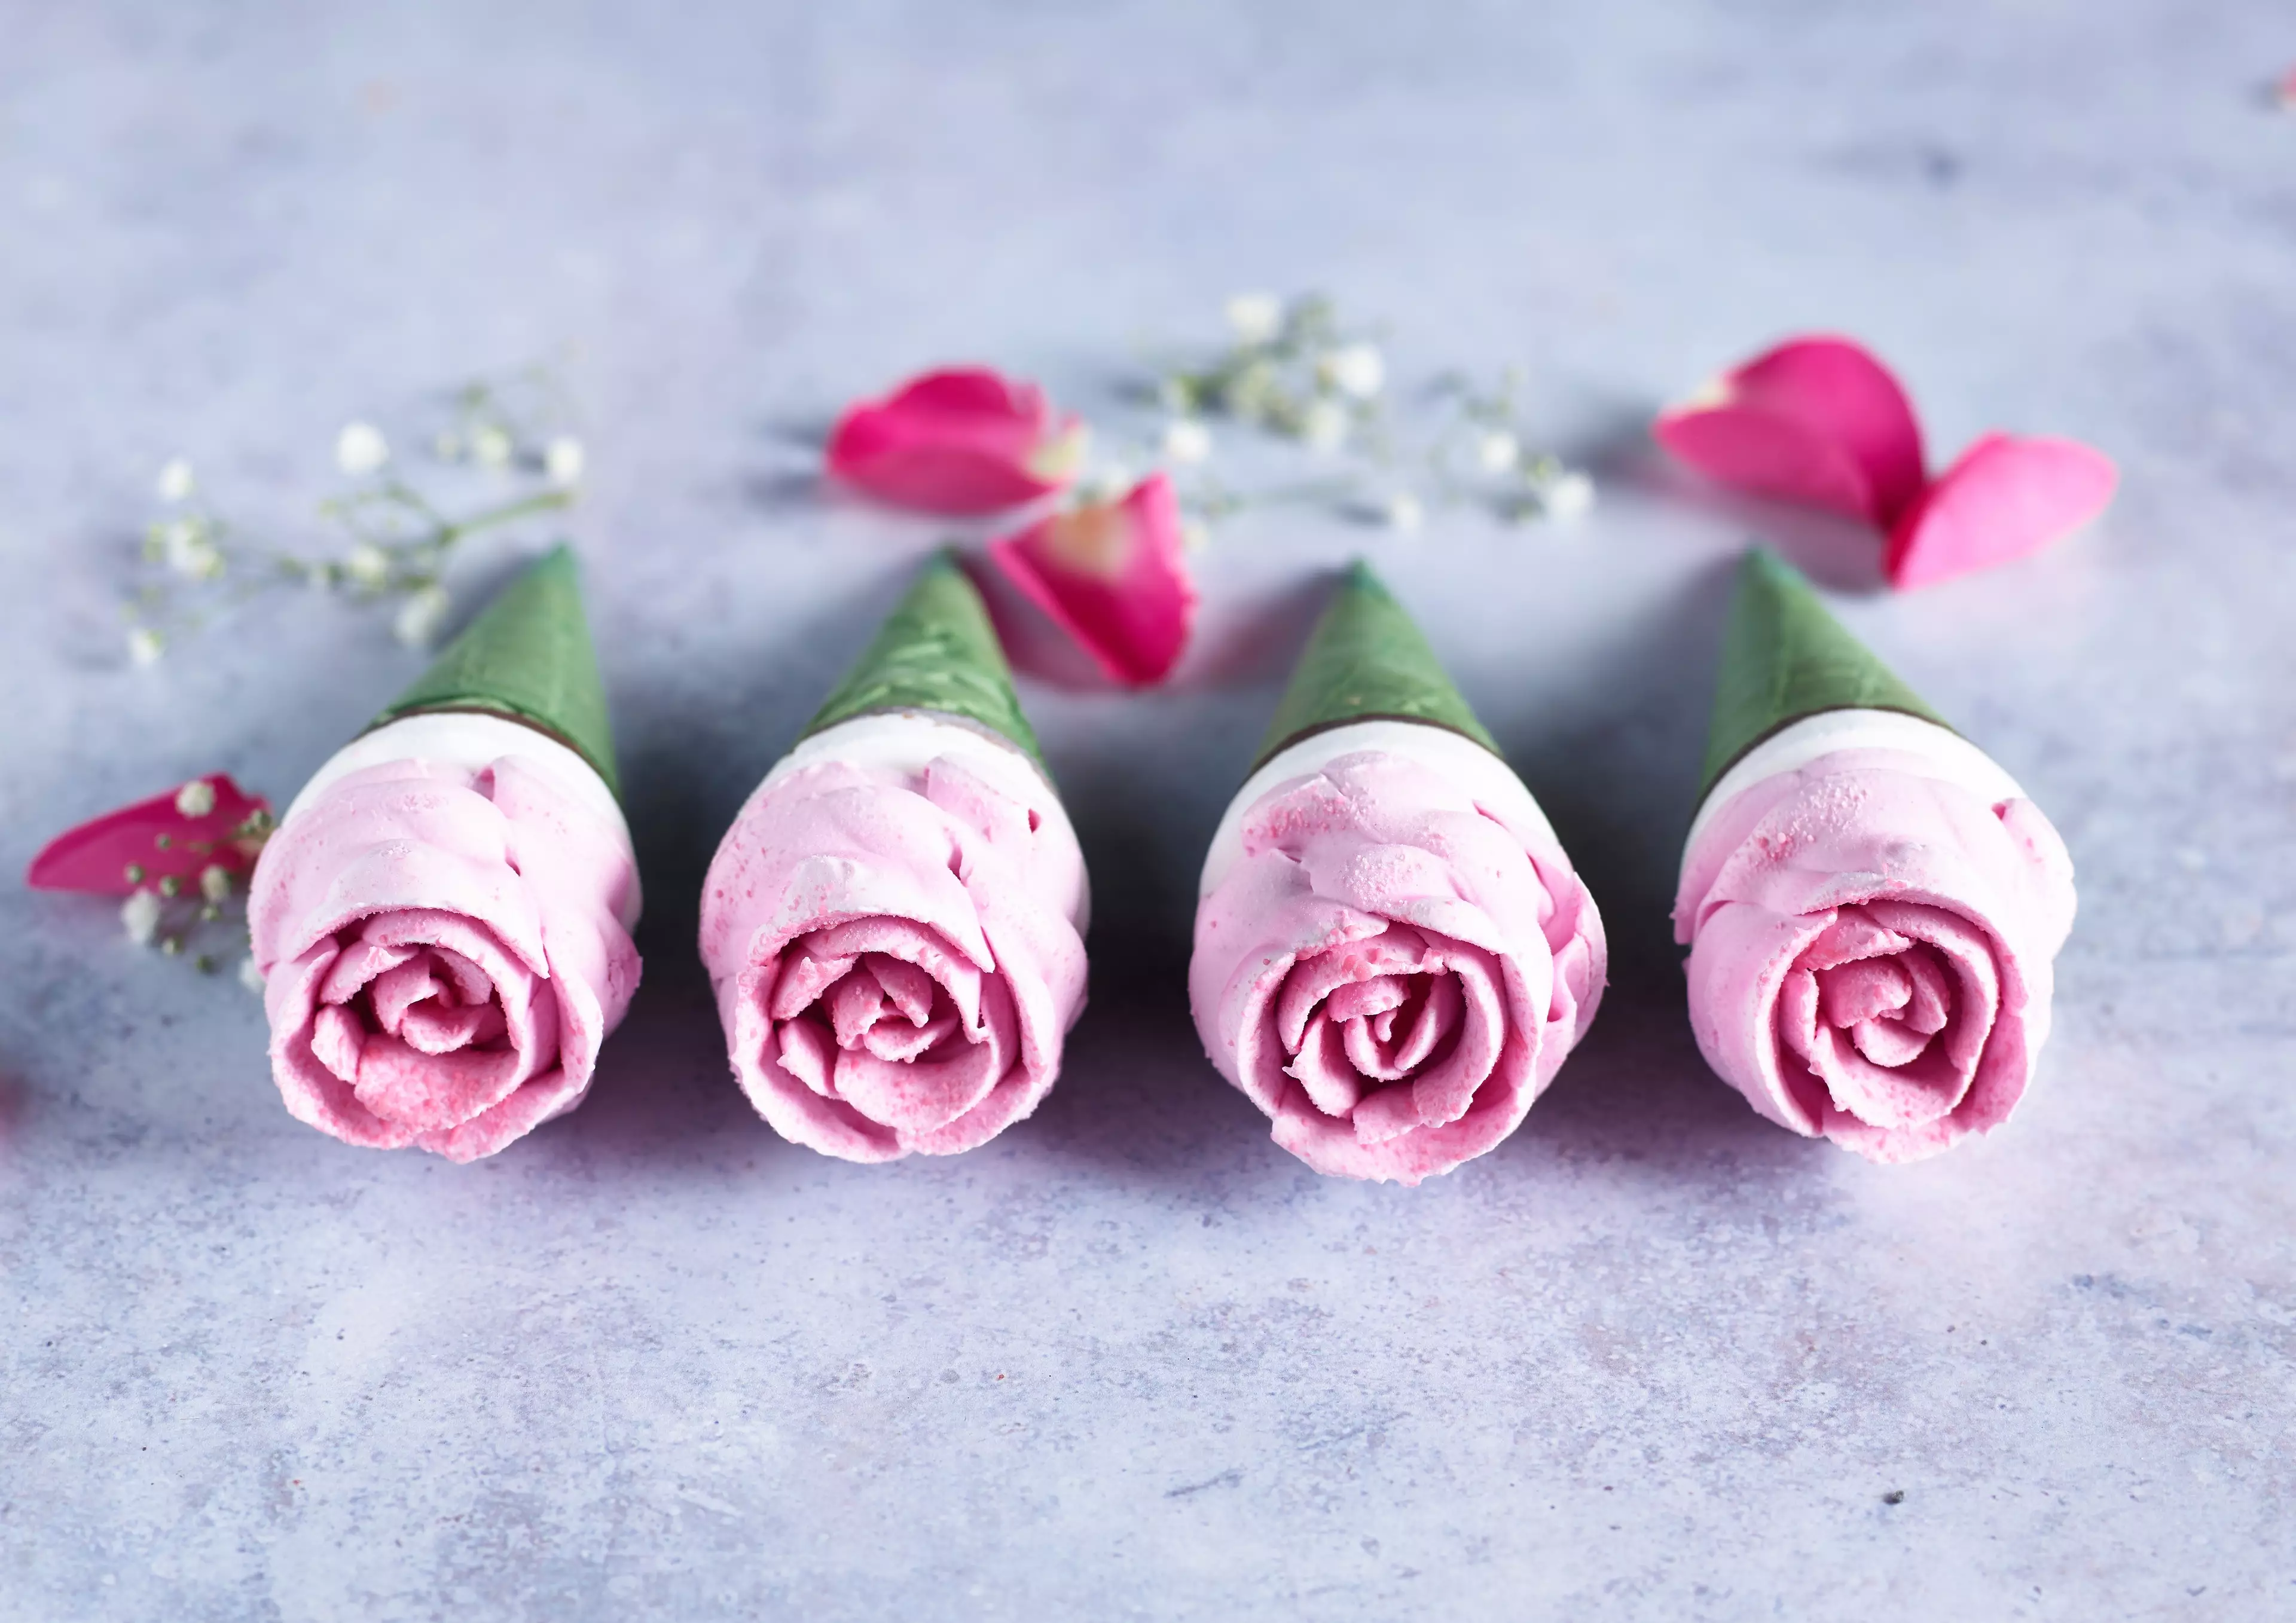 With their delicately shaped petals, the adorable cones are seriously pretty - and photogenic too (